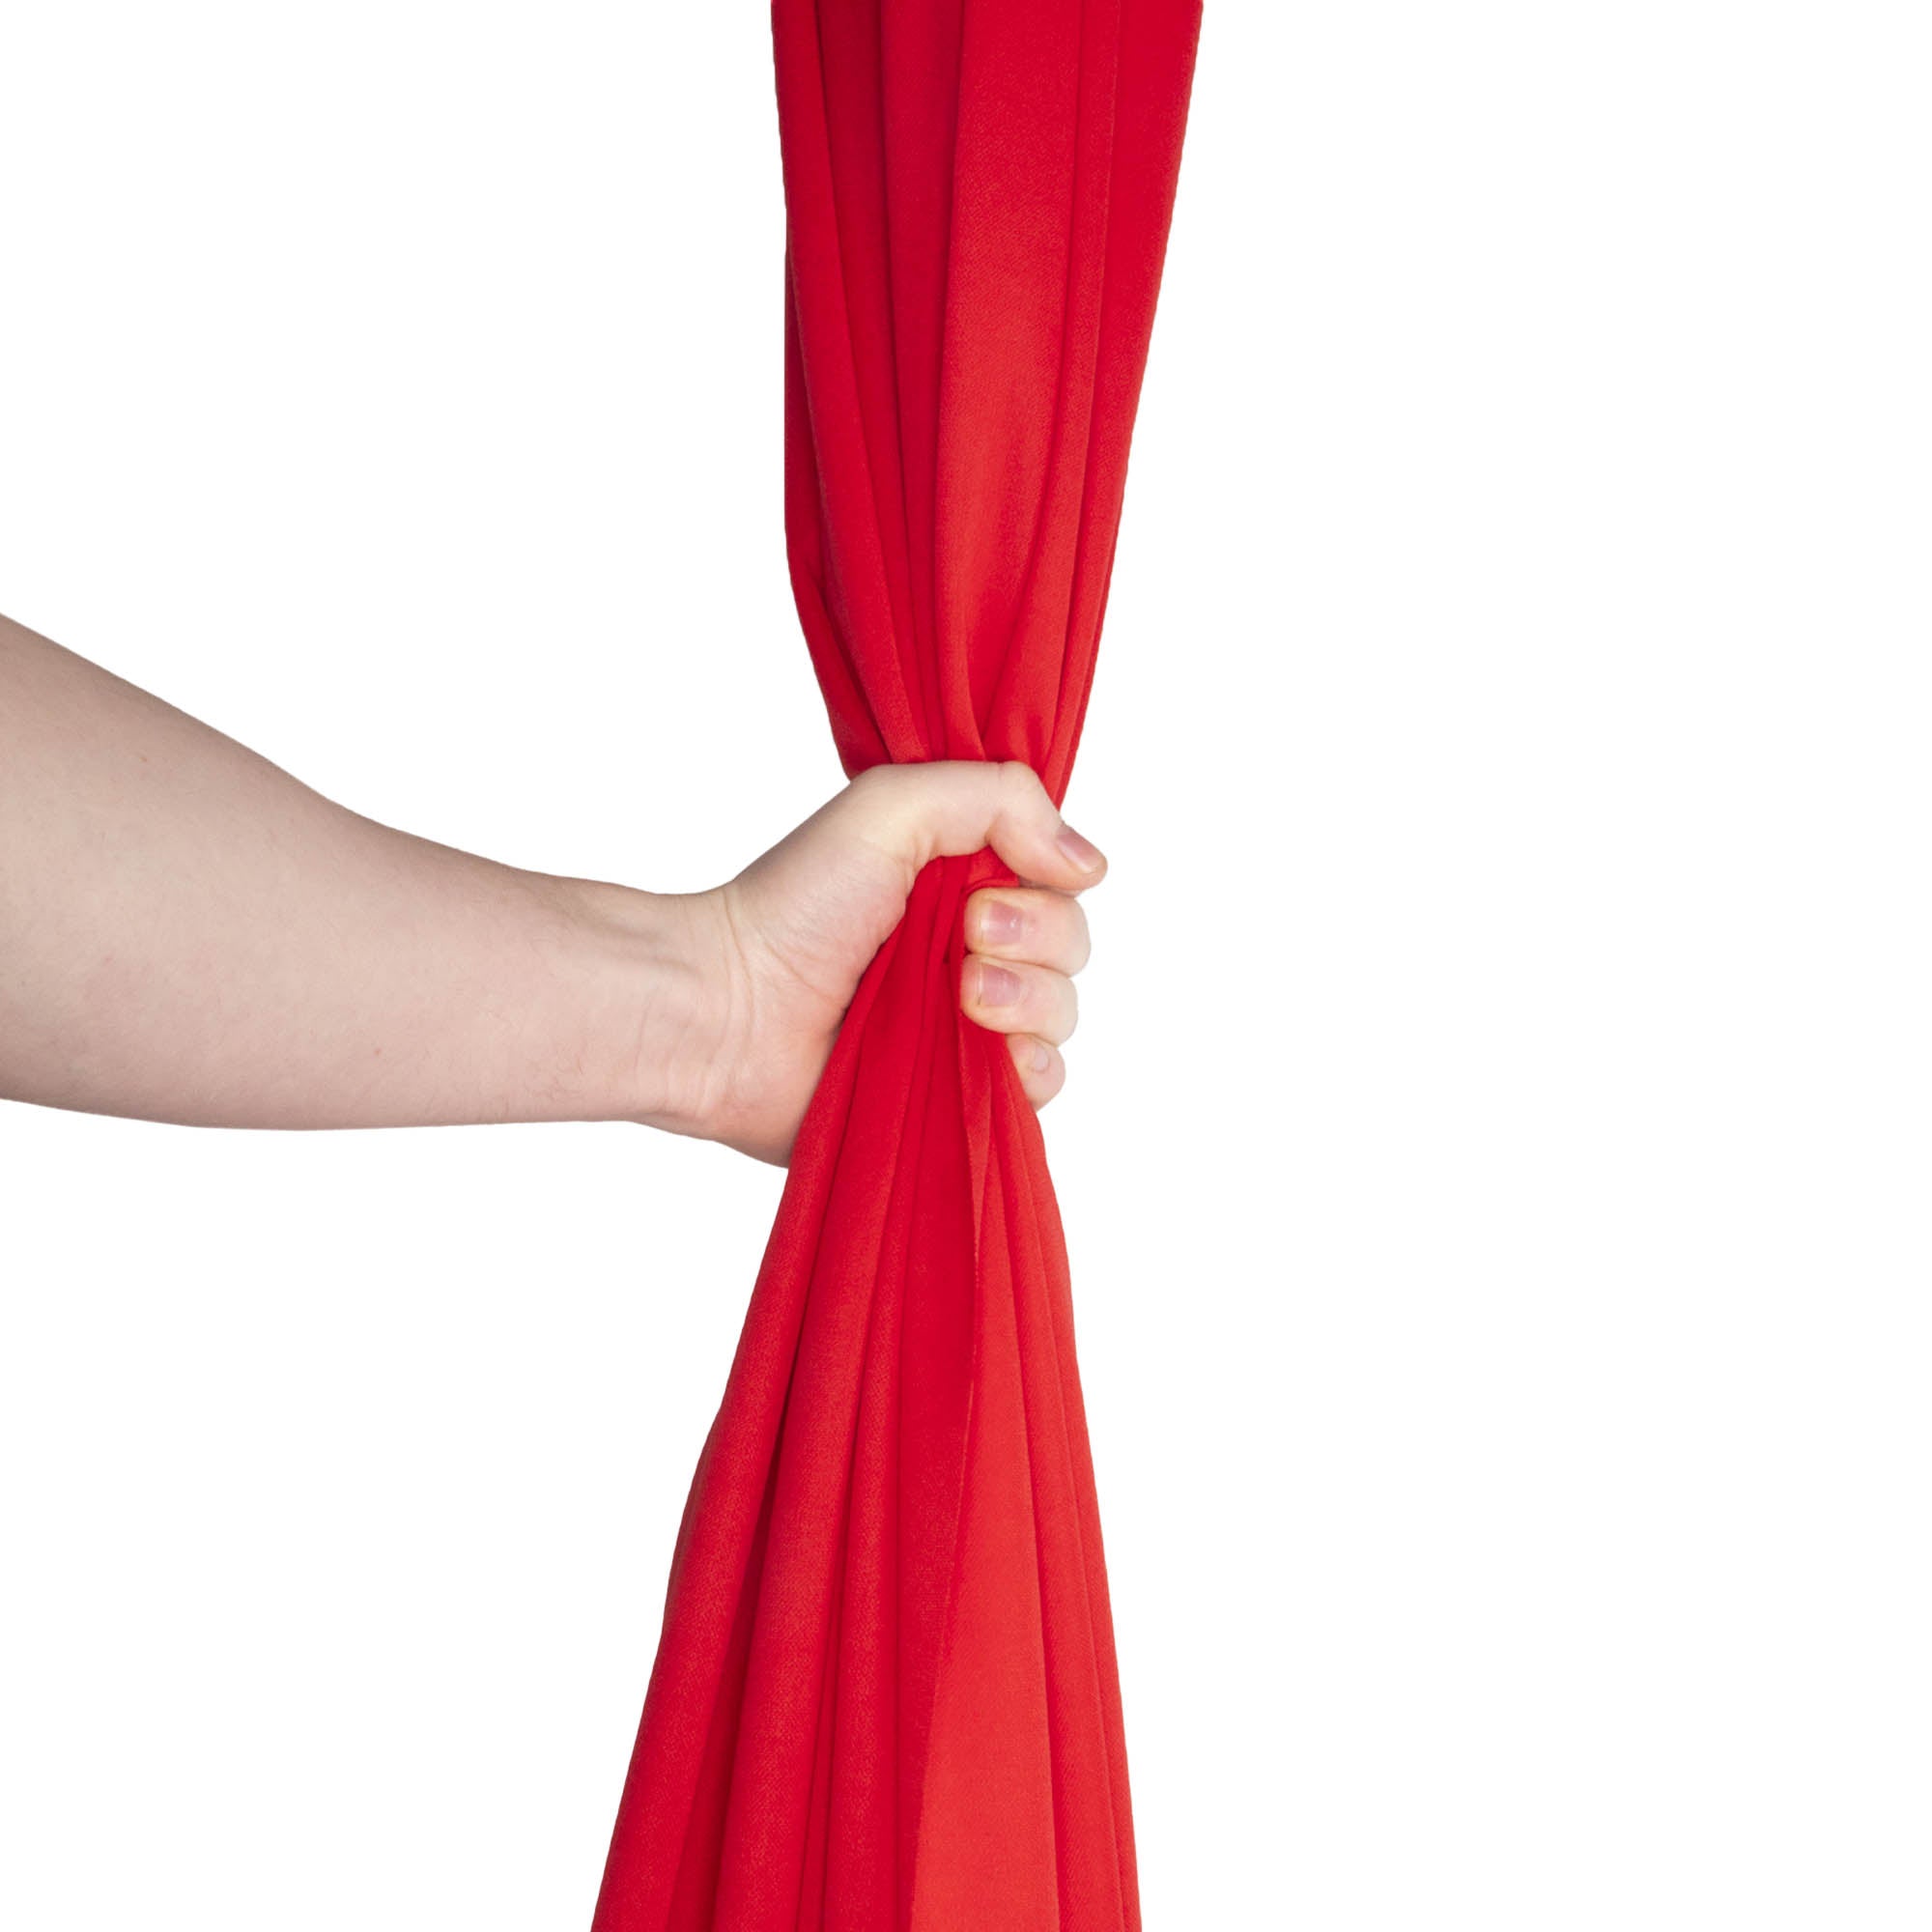 Firetoys youth aerial silk red in hand